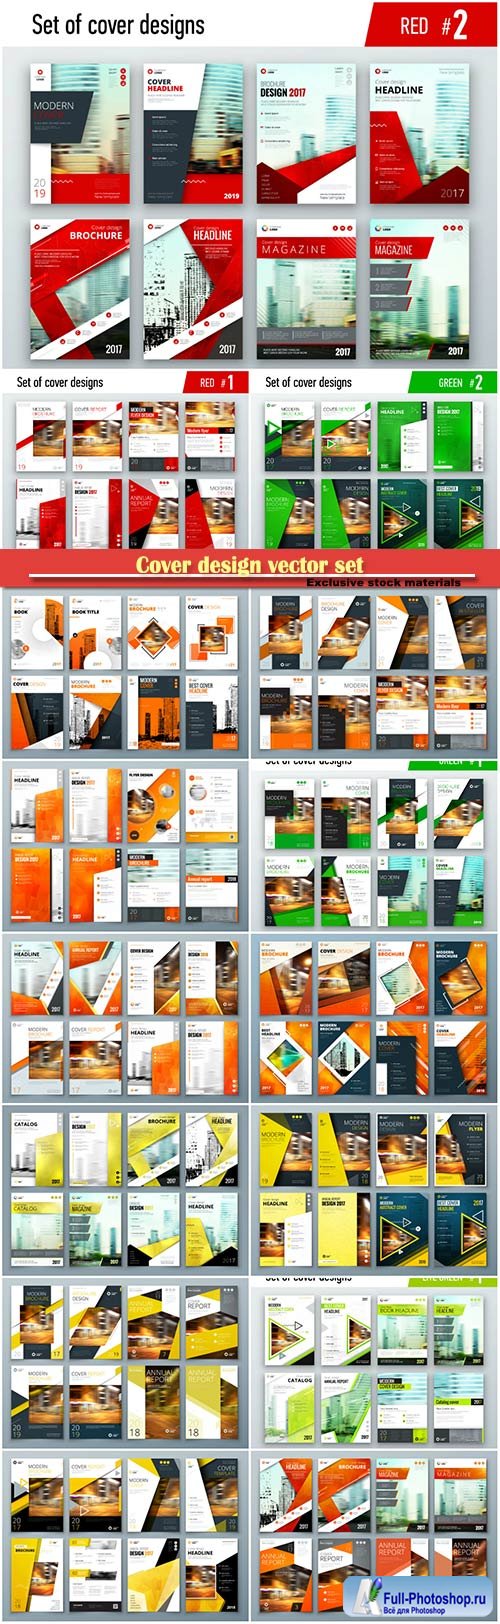 Cover design vector set, corporate business template for brochure, report, catalog, magazine